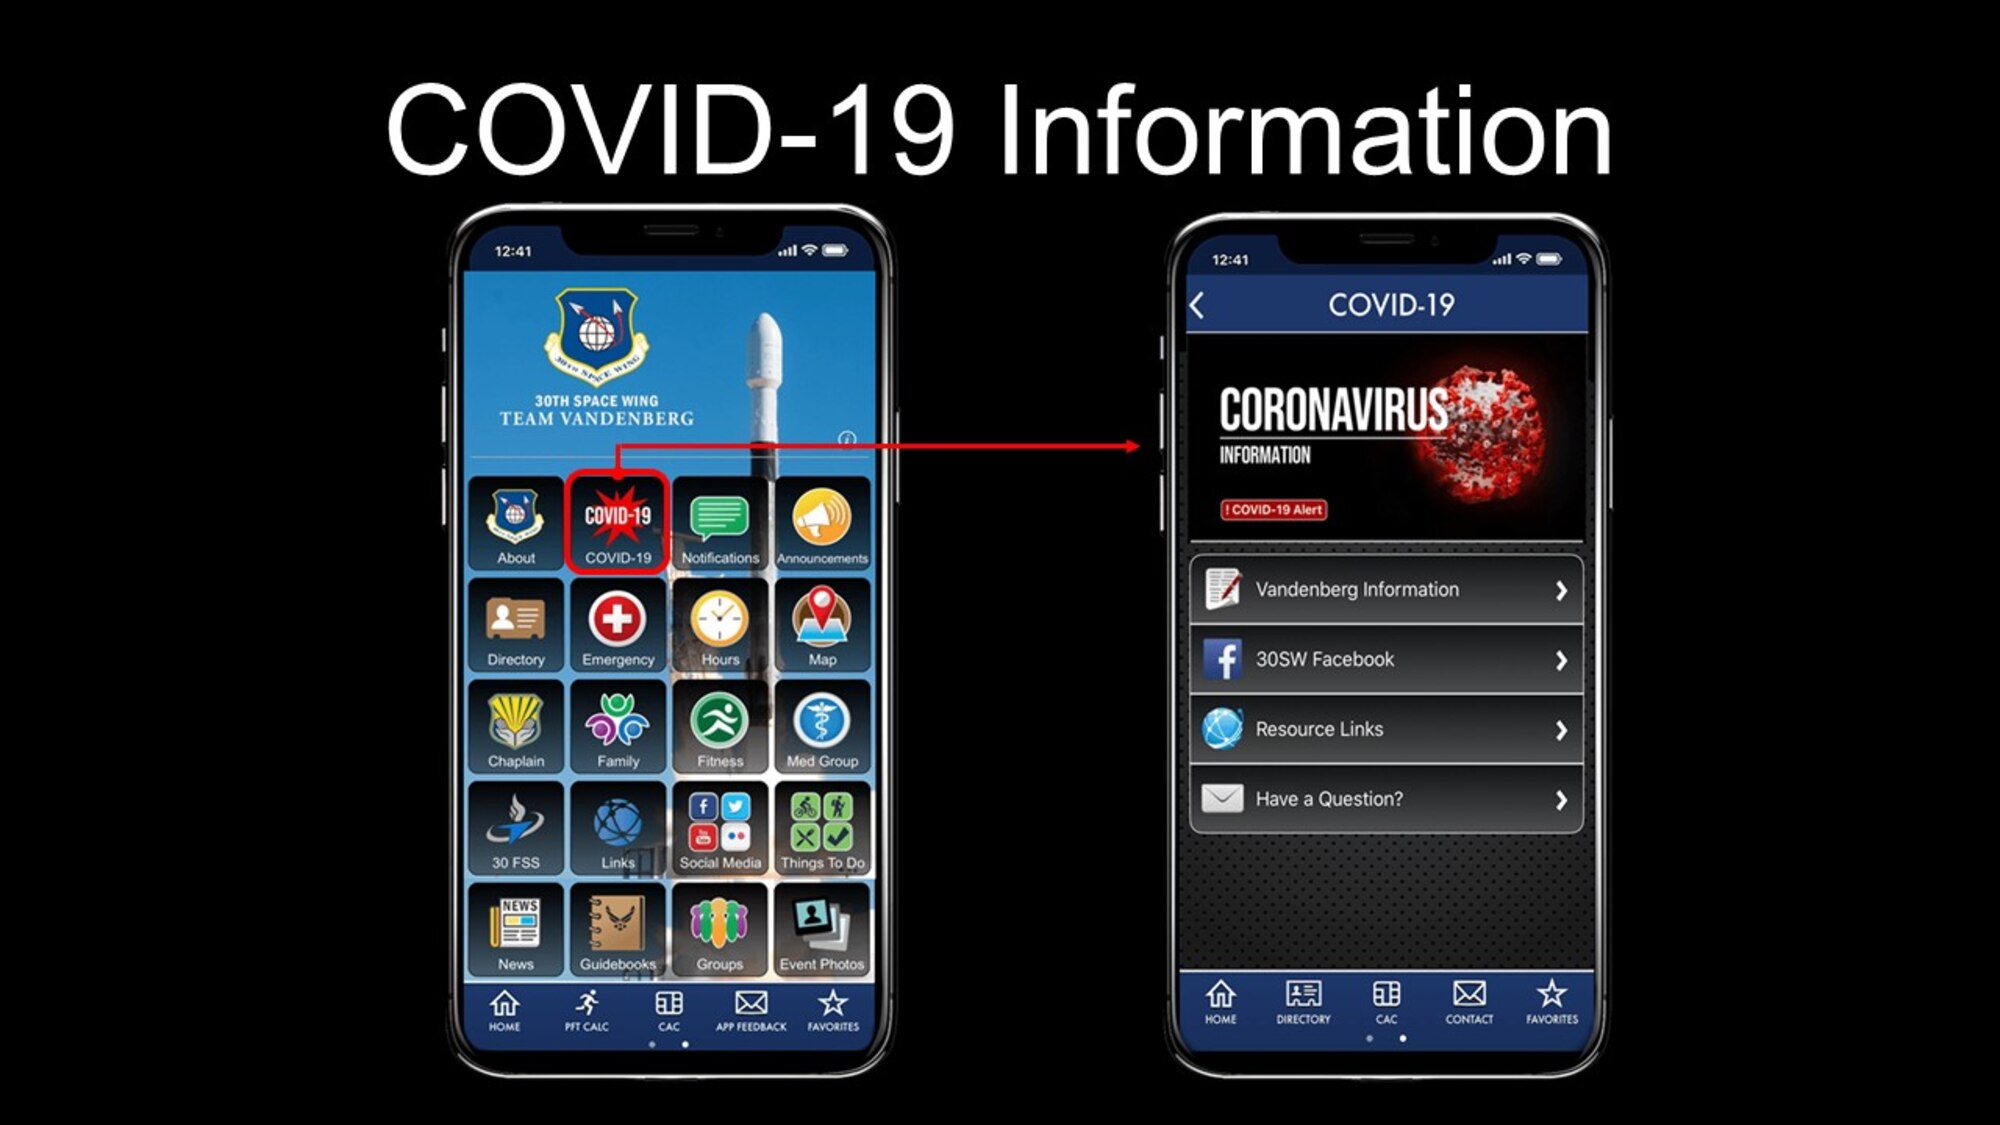 These slides describe how to add 30th Space Wing on the AF Connect app